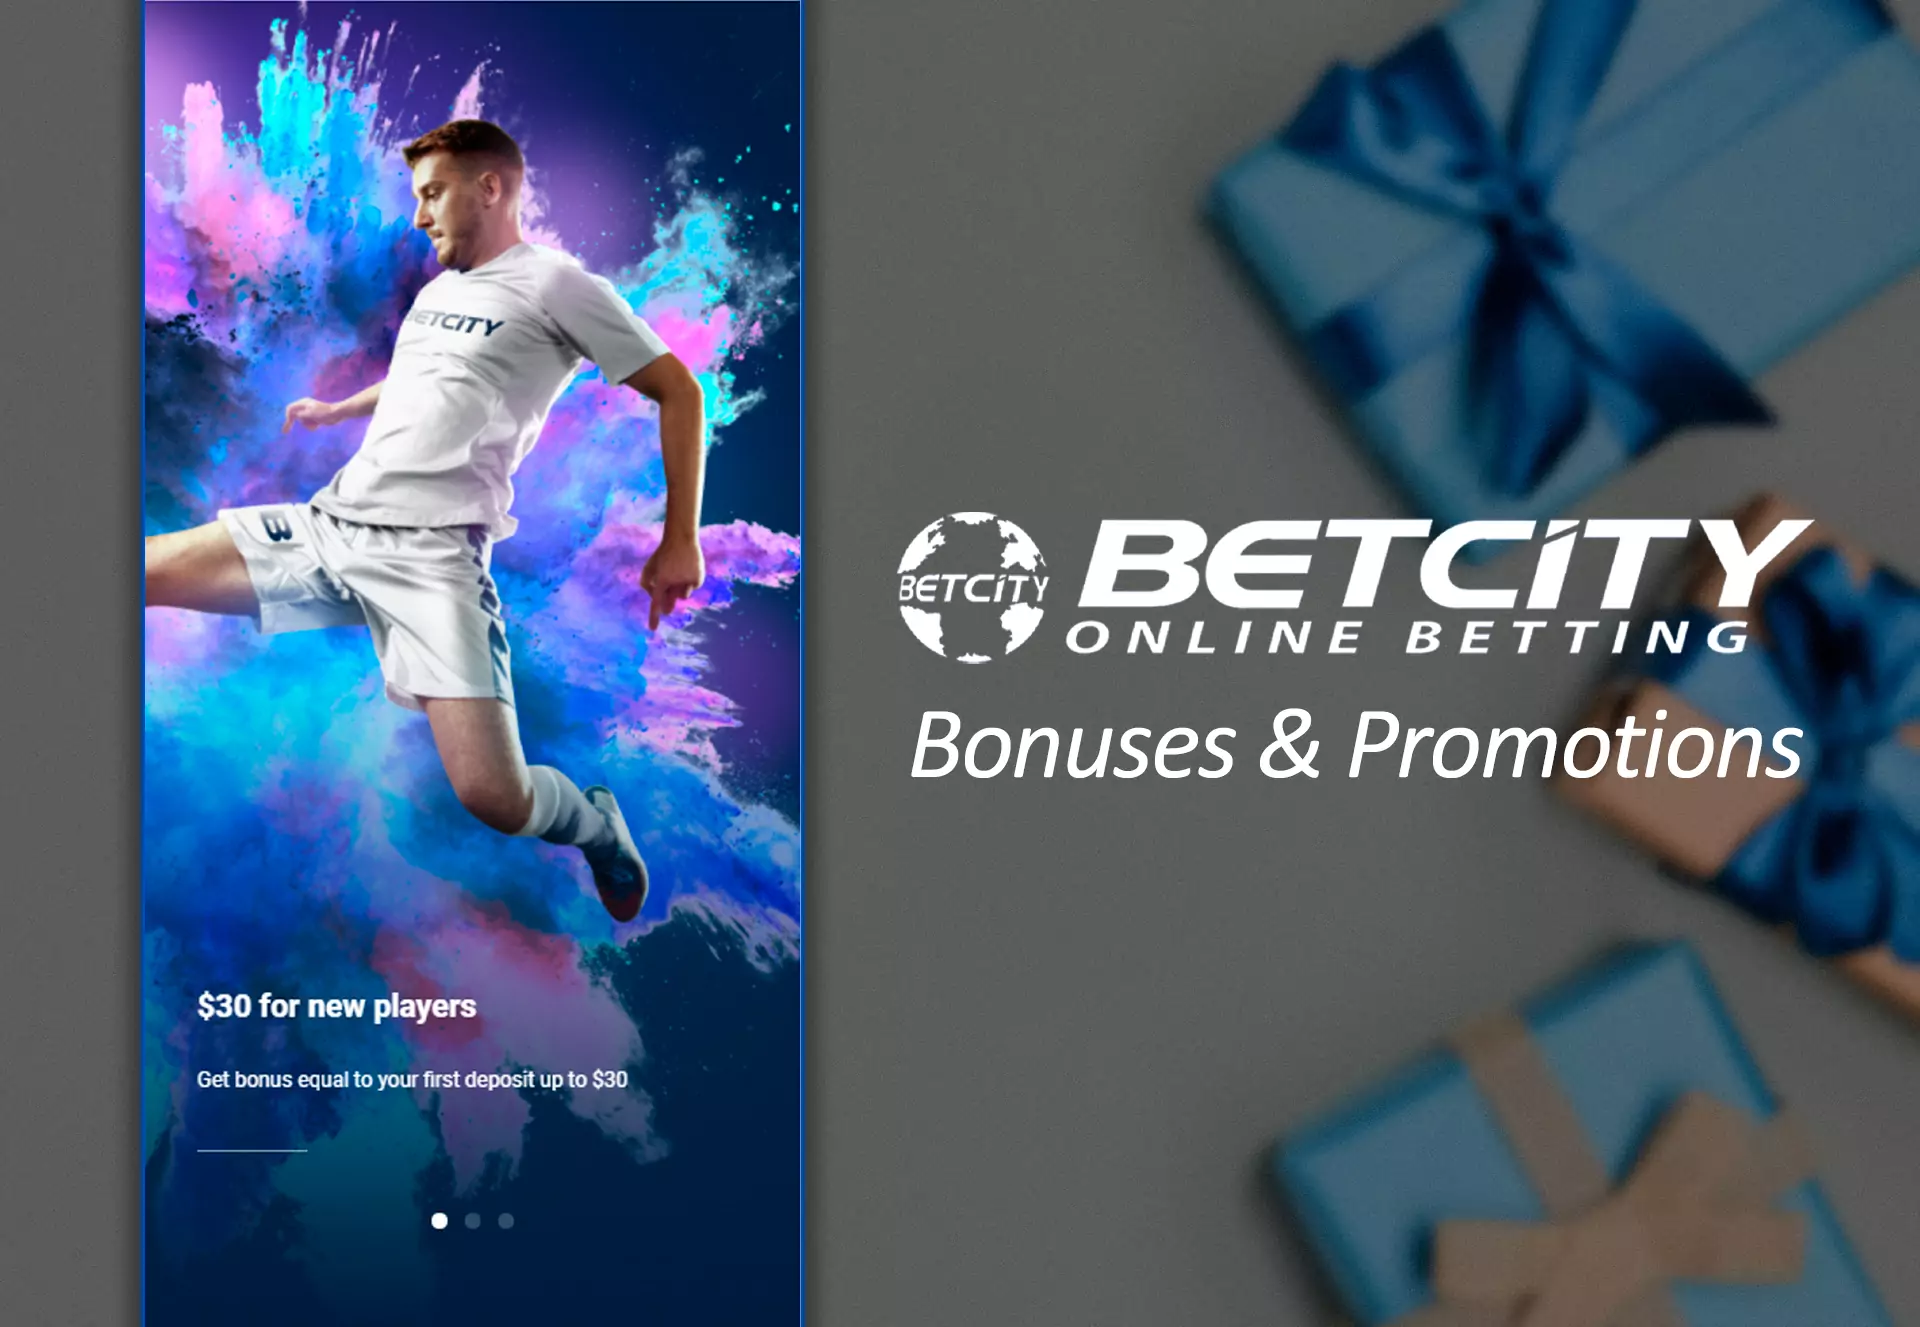 If you are a new user at Betcity, you can count on receiving the welcome offer after registration.